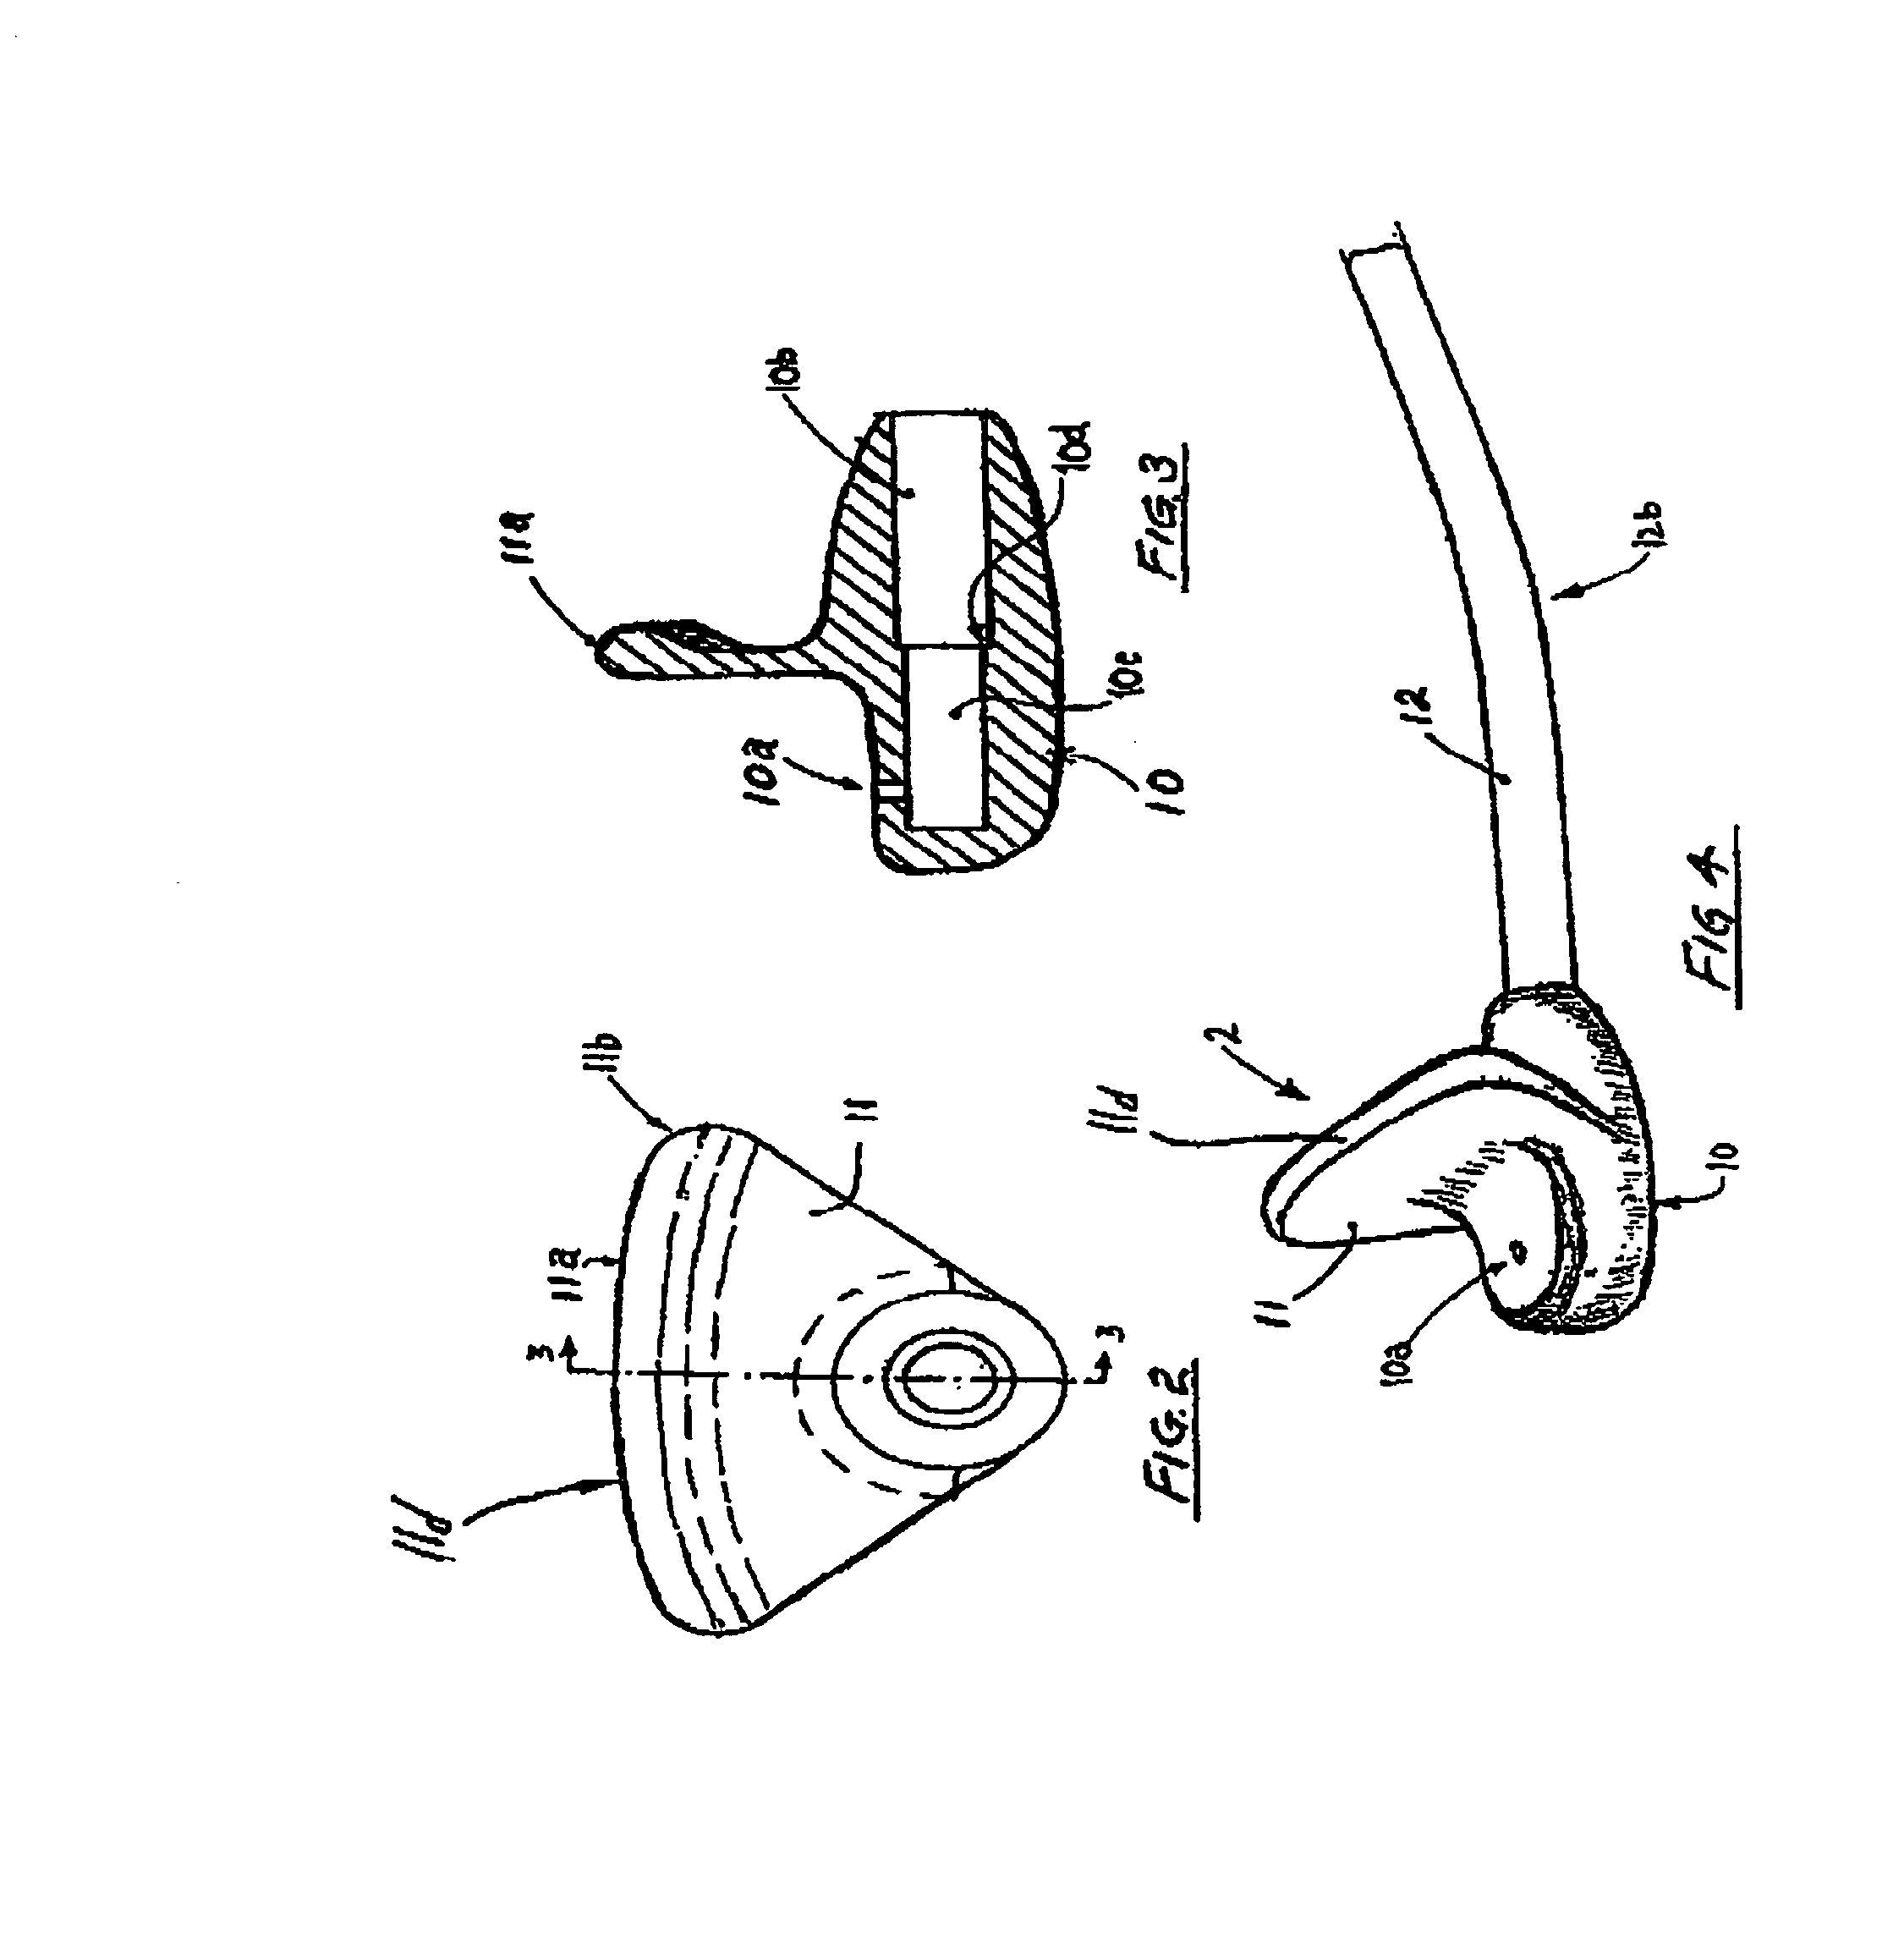 Anal cleaning device